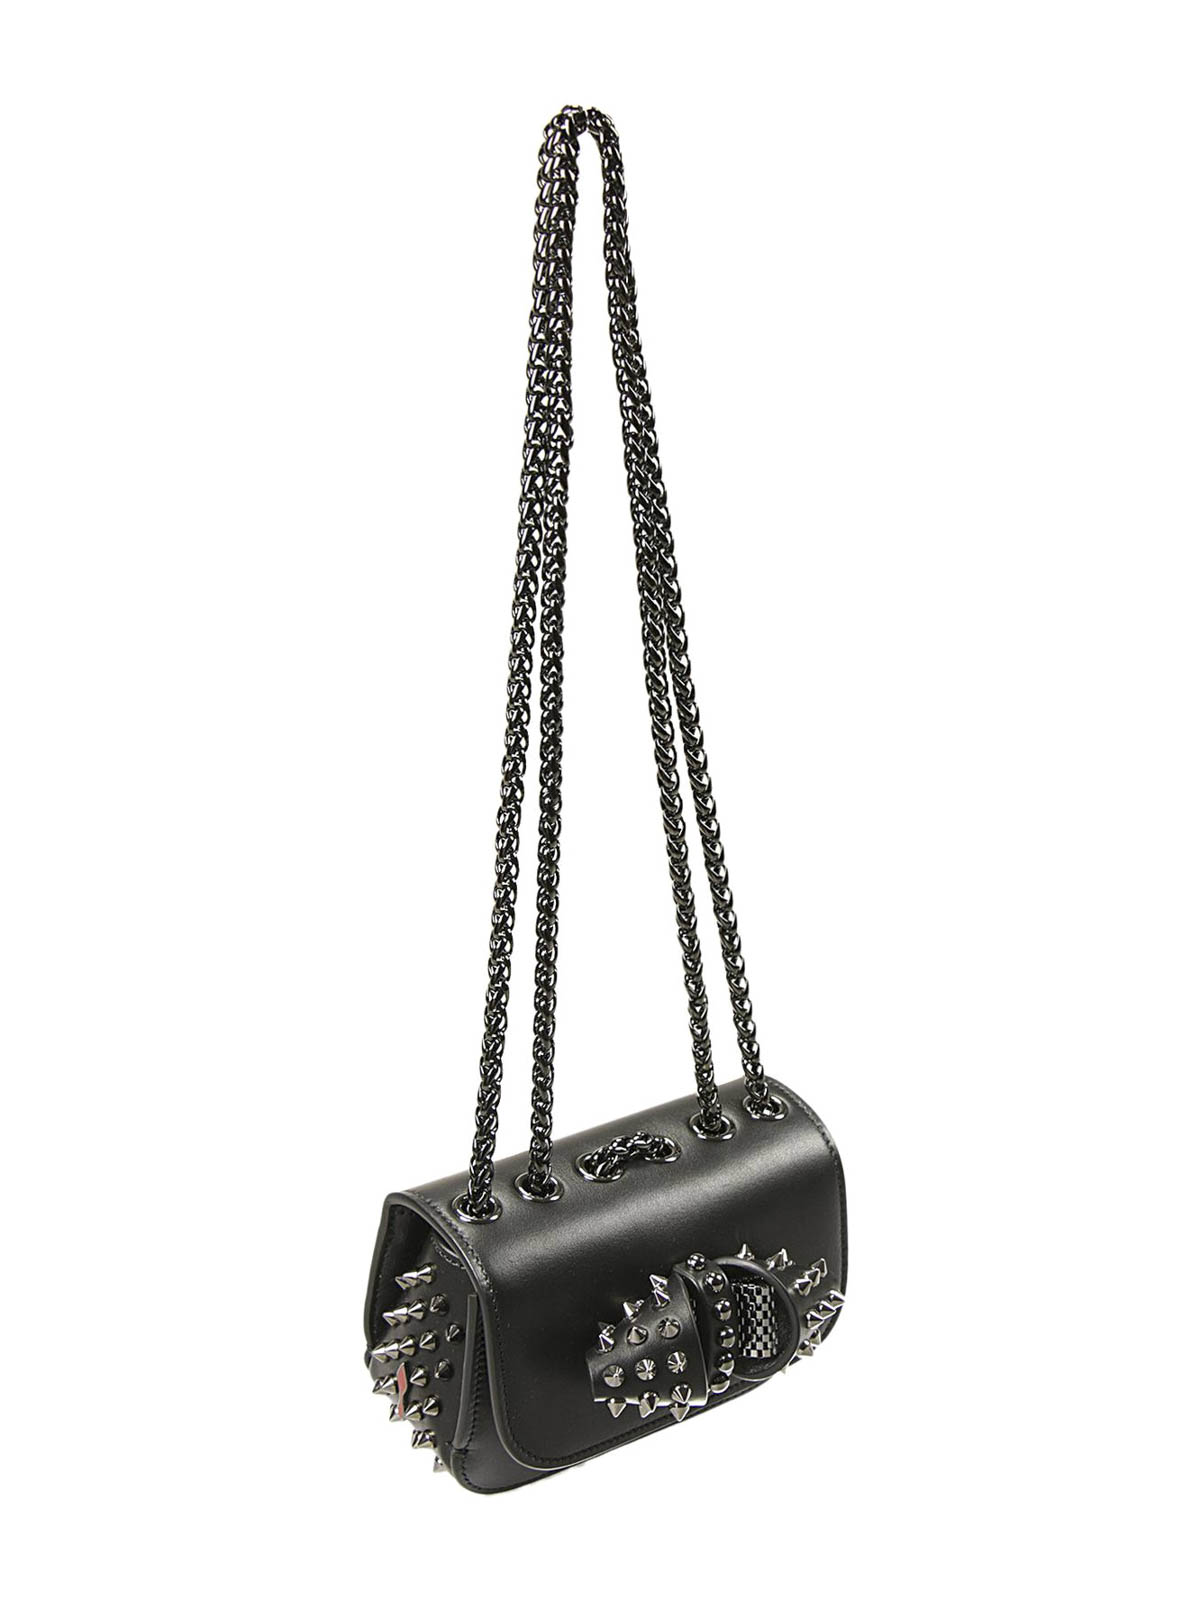 Christian Louboutin Sweety Charity Mini Spiked Leather Shoulder